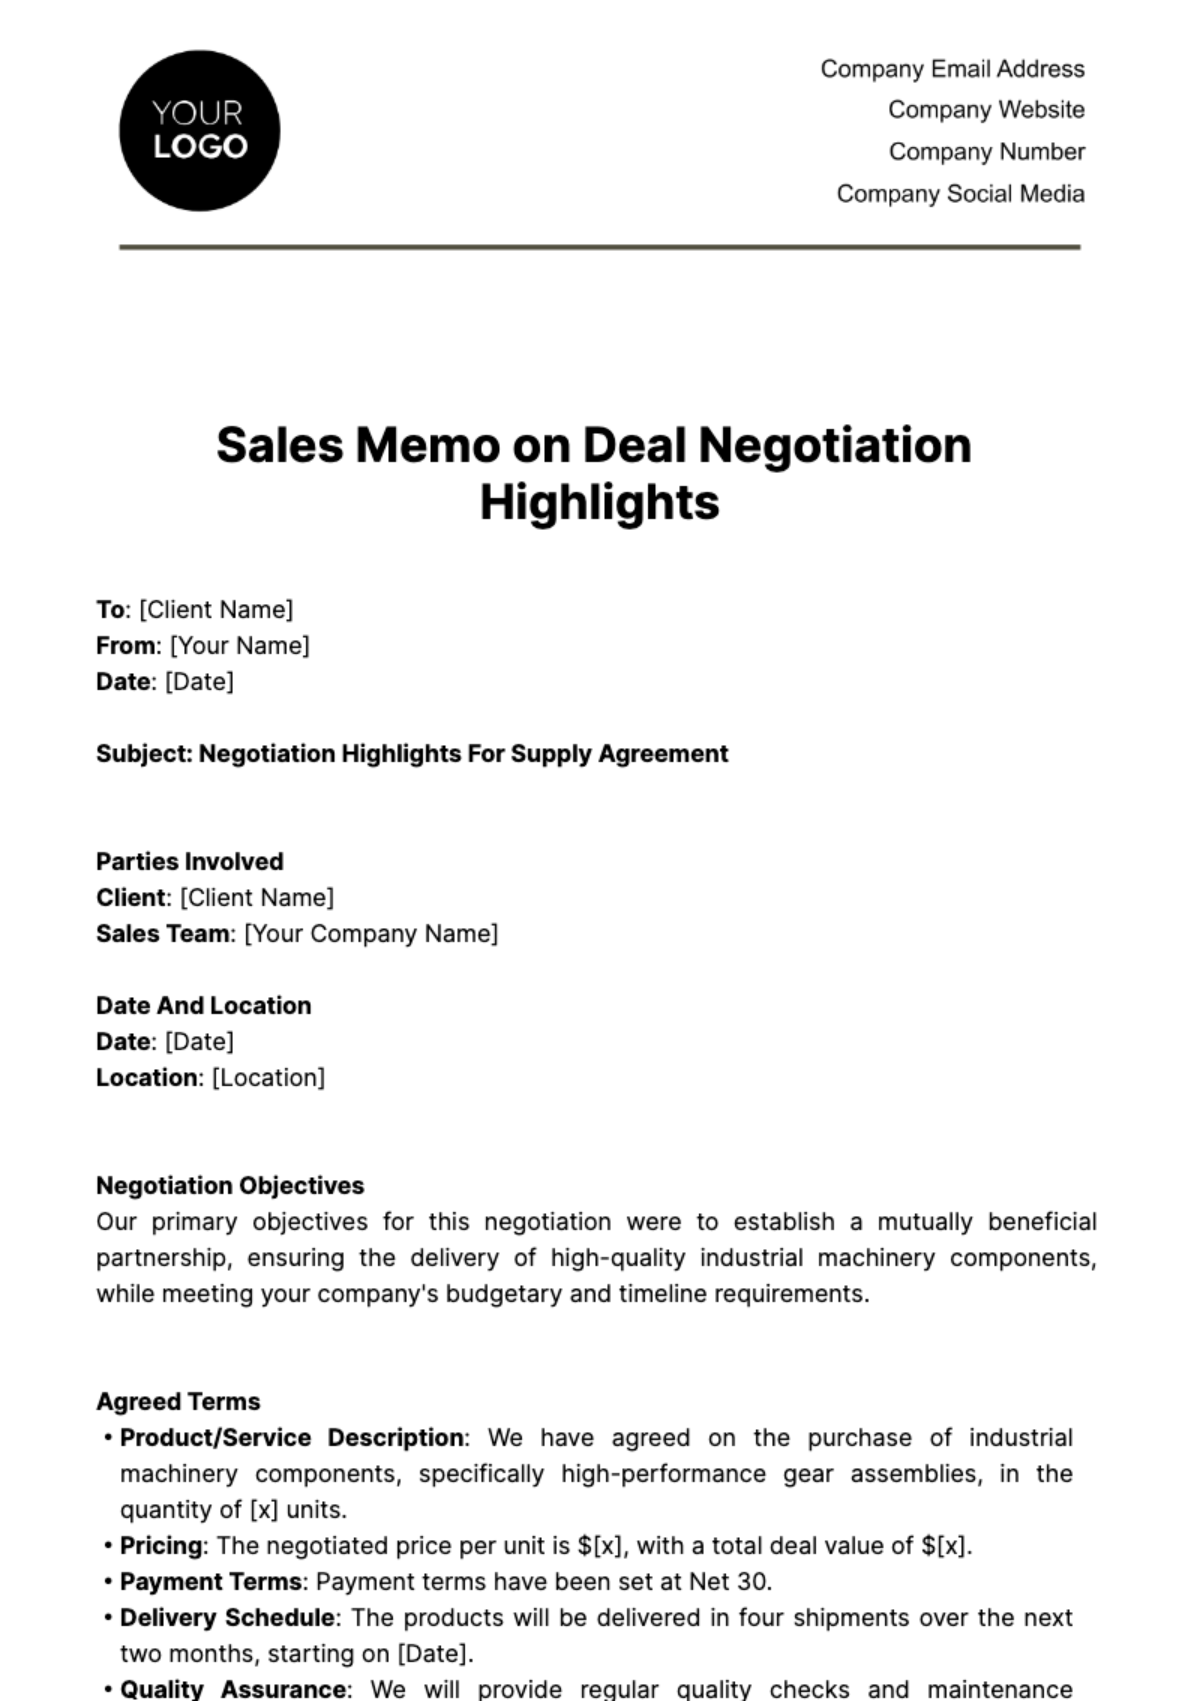 Sales Memo on Deal Negotiation Highlights Template